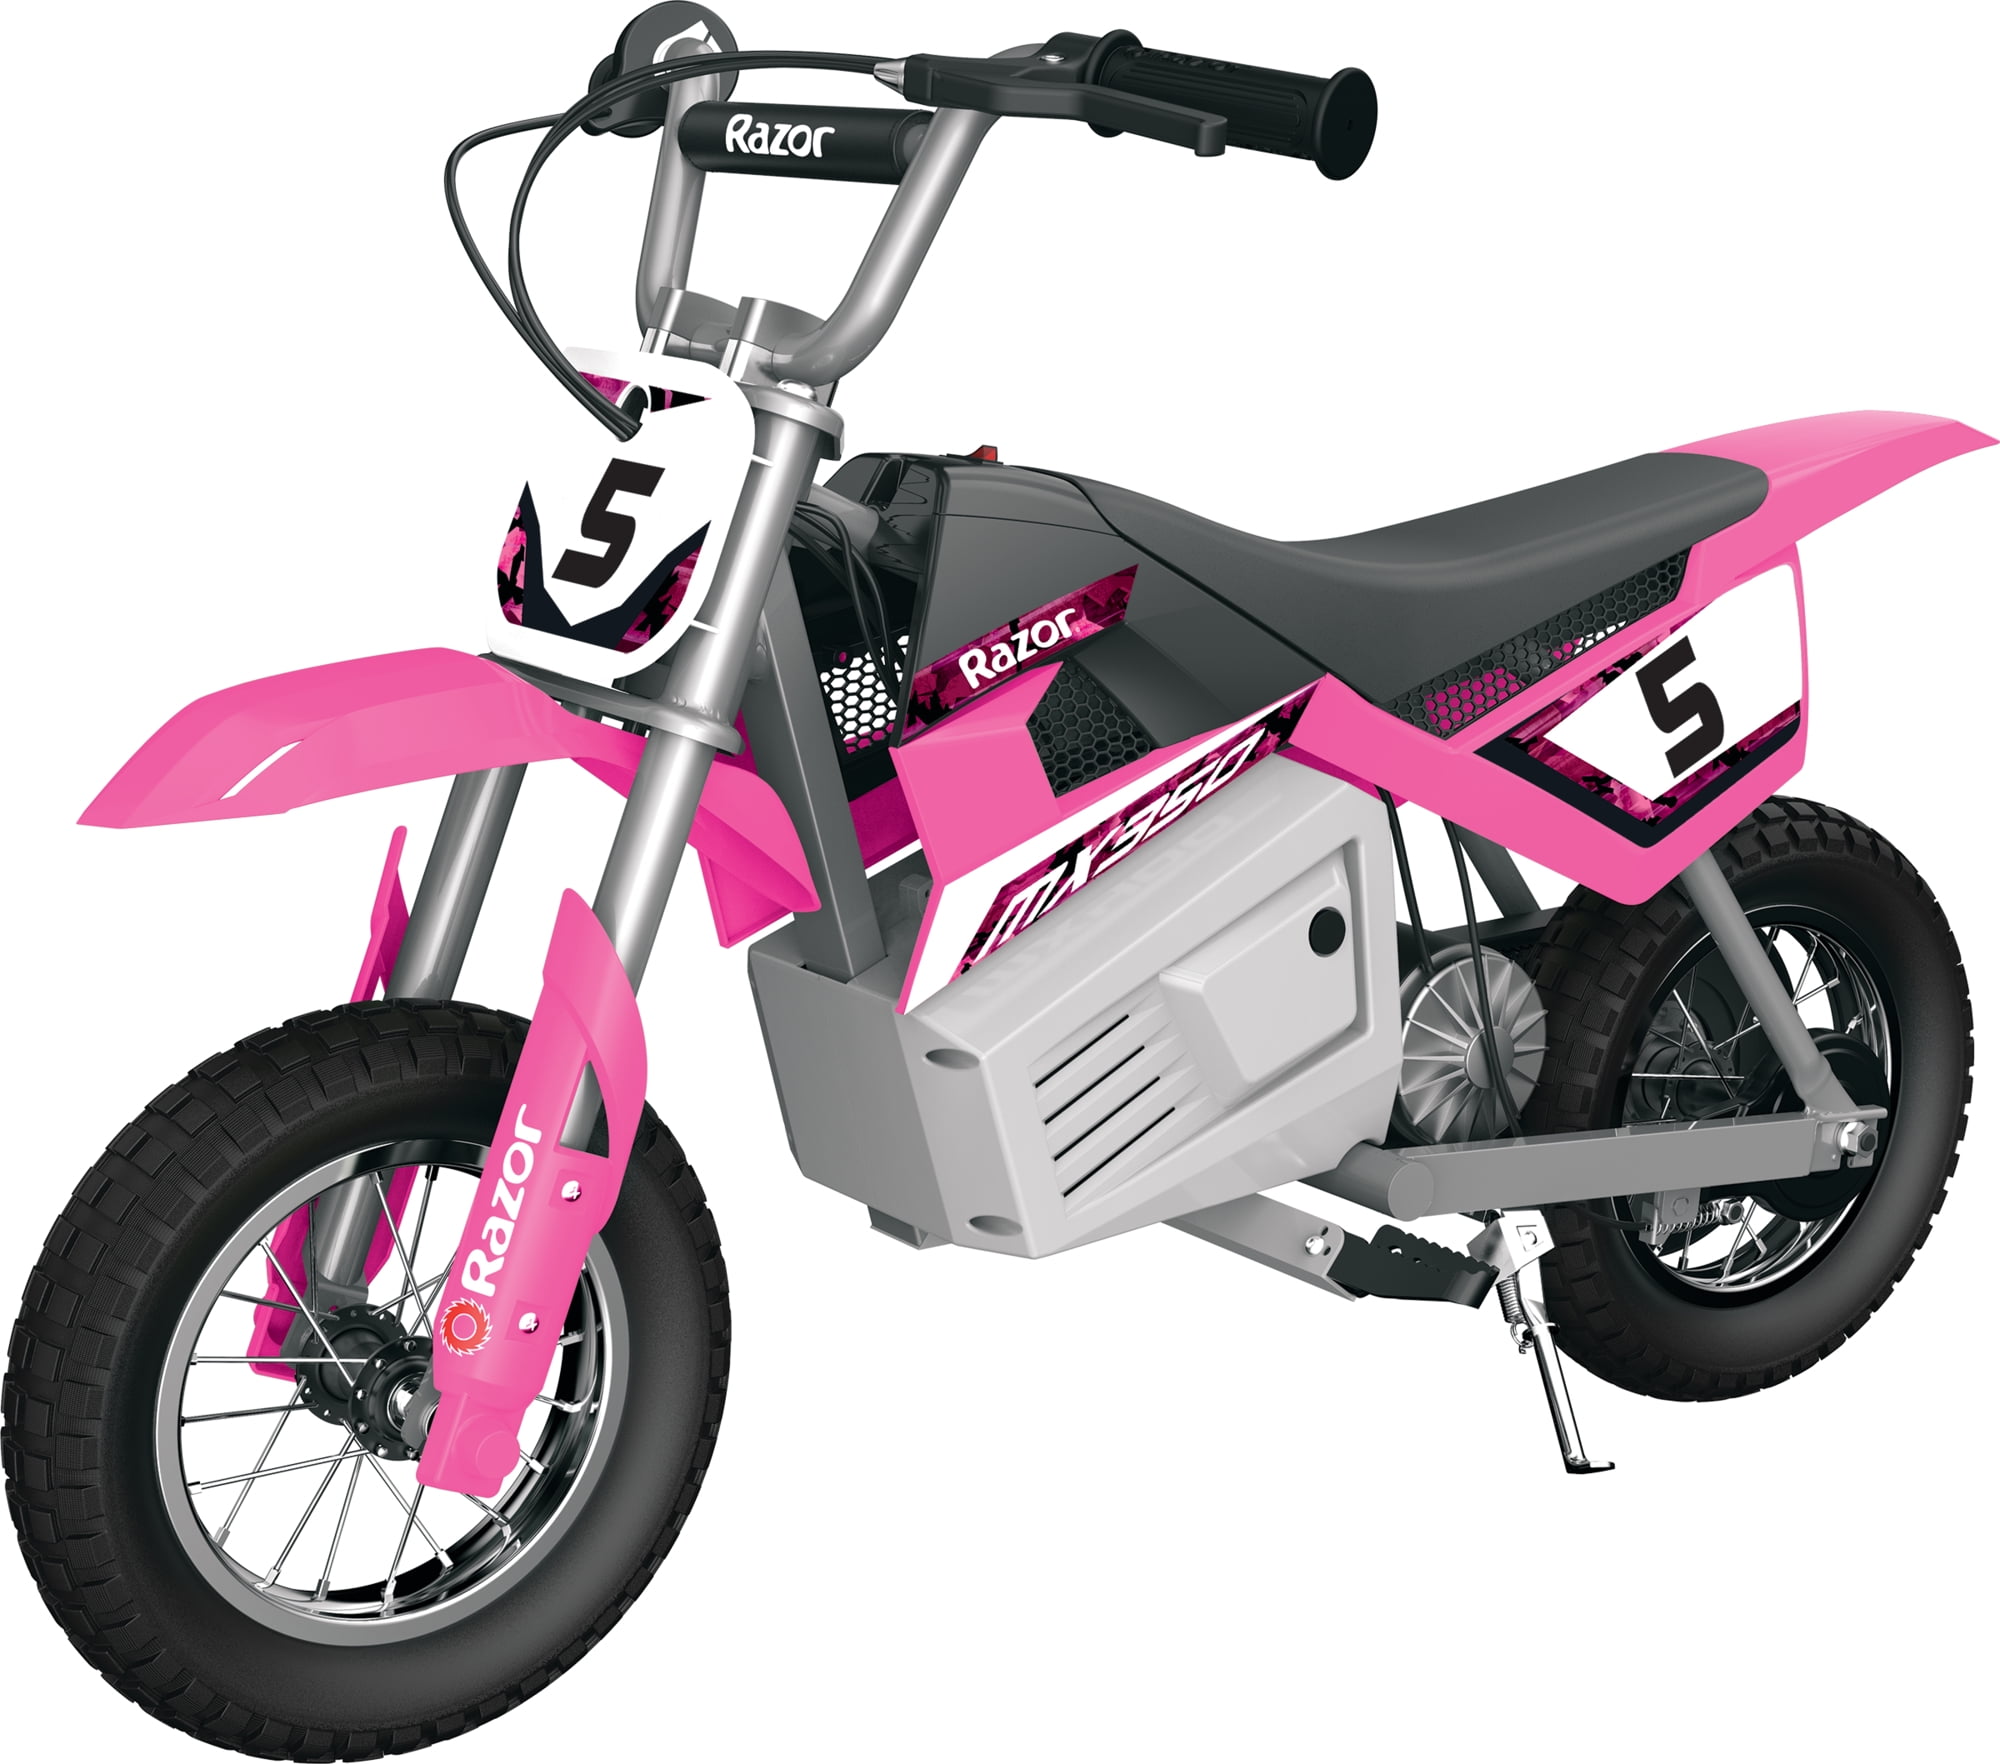 Razor Dirt Rocket MX350 - Black with Decals Included, 24V Electric-Powered  Dirt Bike for Kids 13+ 